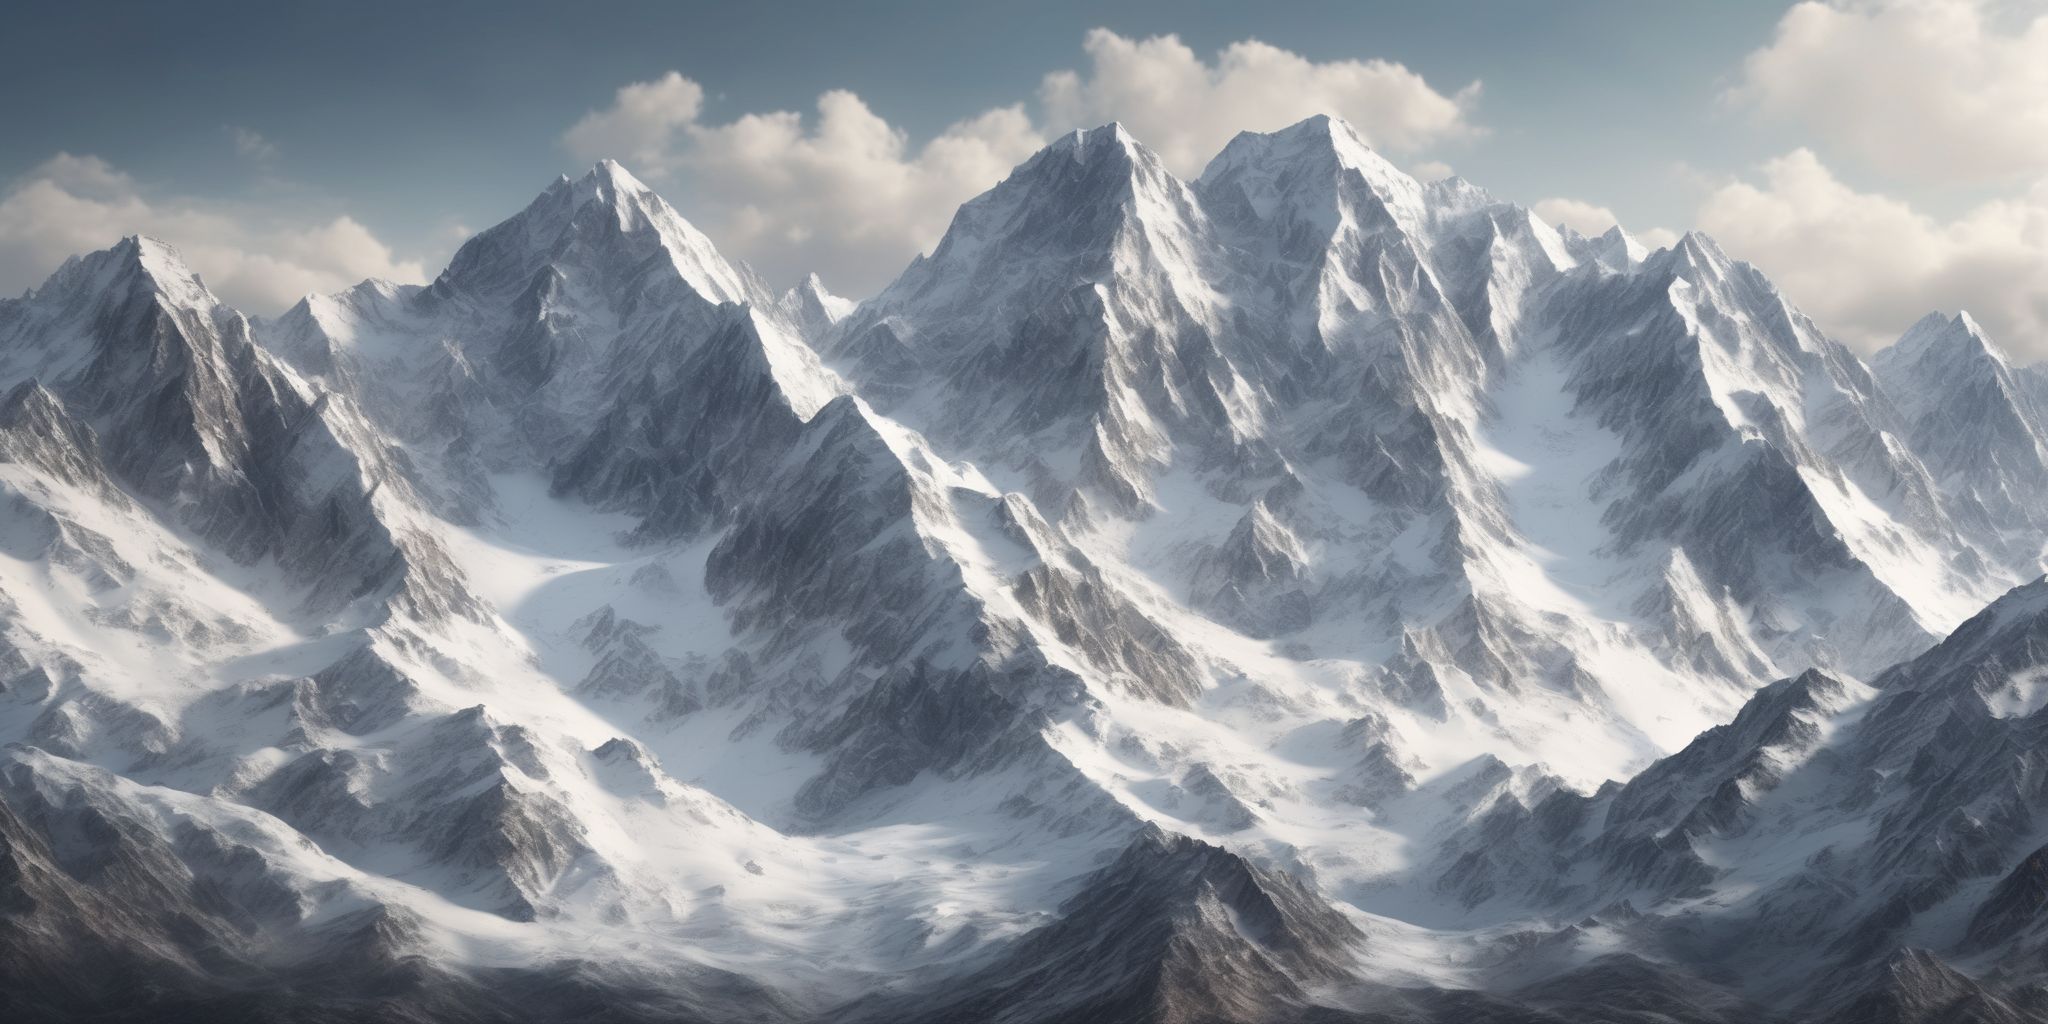 Snow-capped mountains  in realistic, photographic style